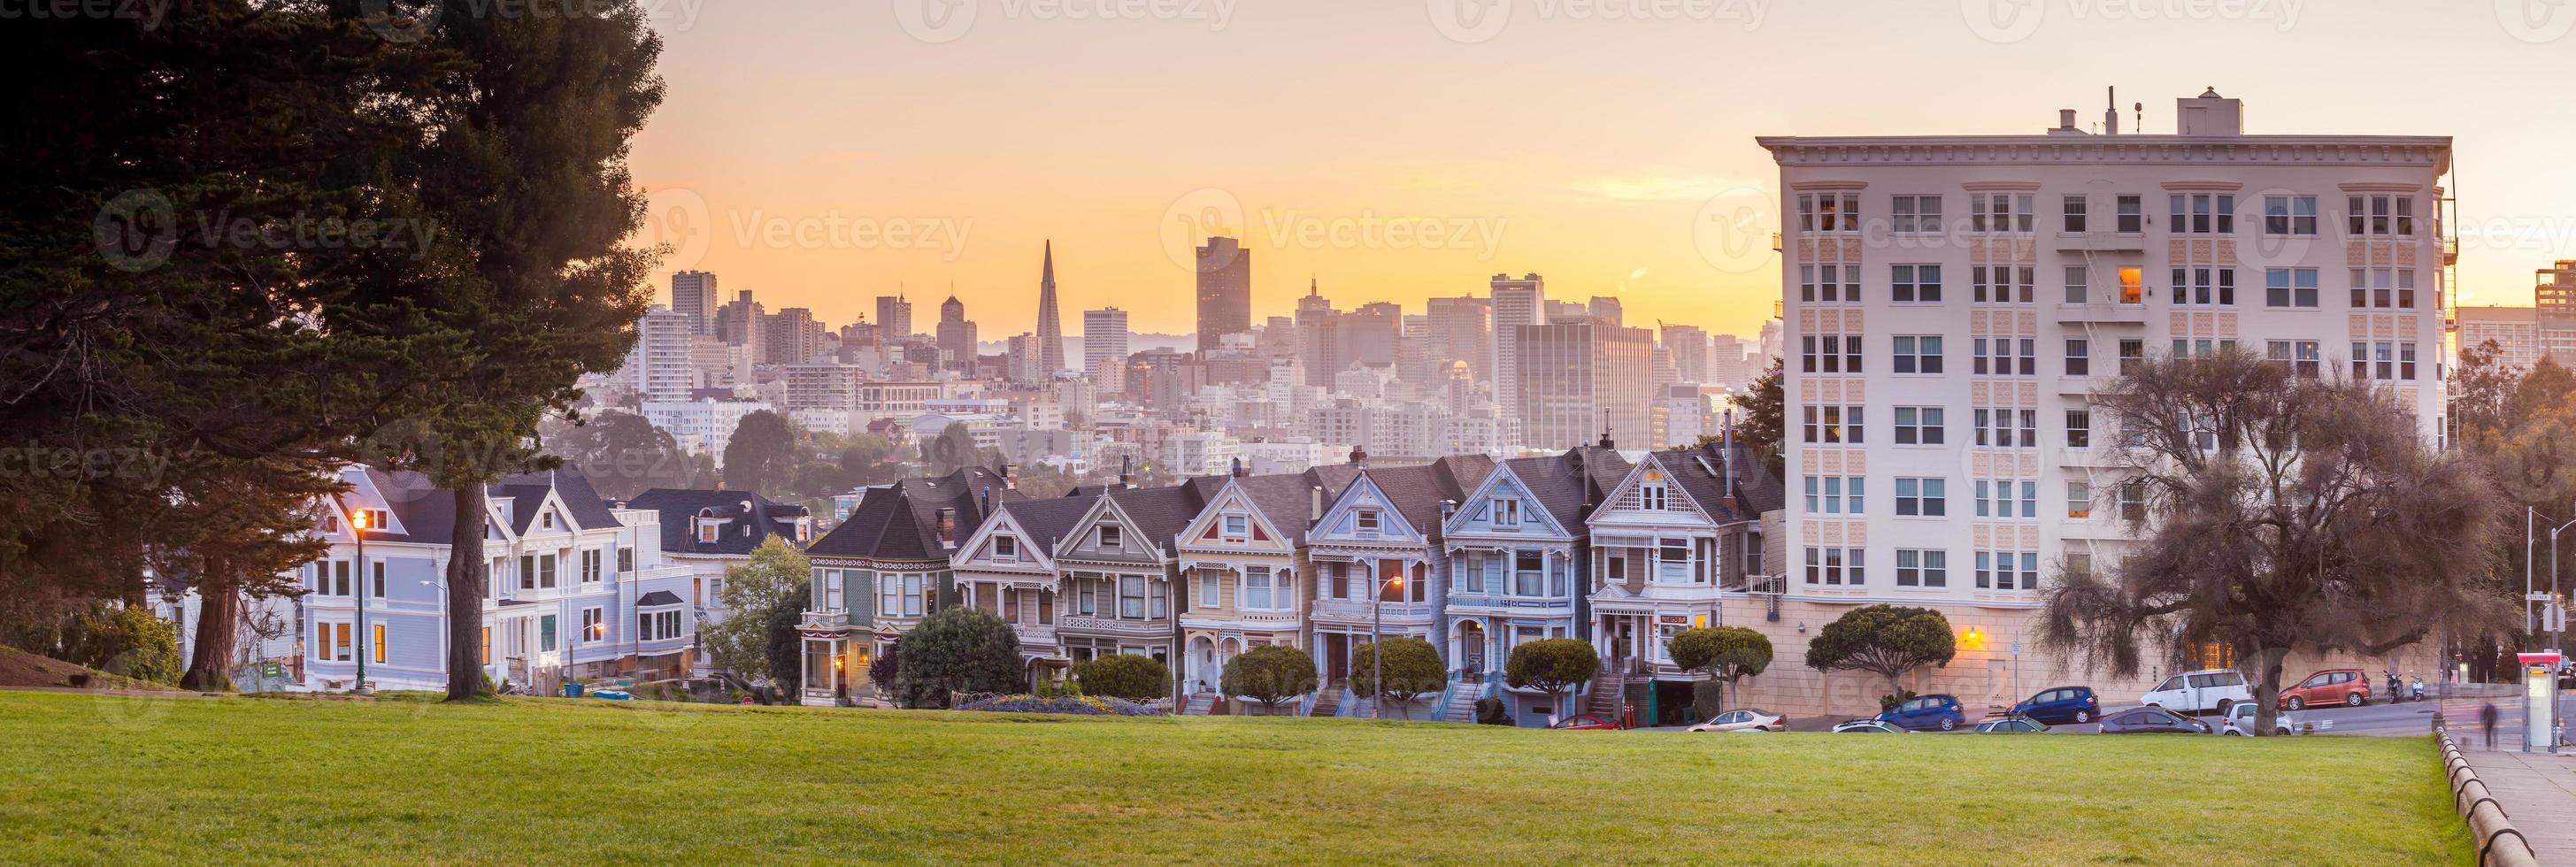 The Painted Ladies of San Francisco, USA. photo